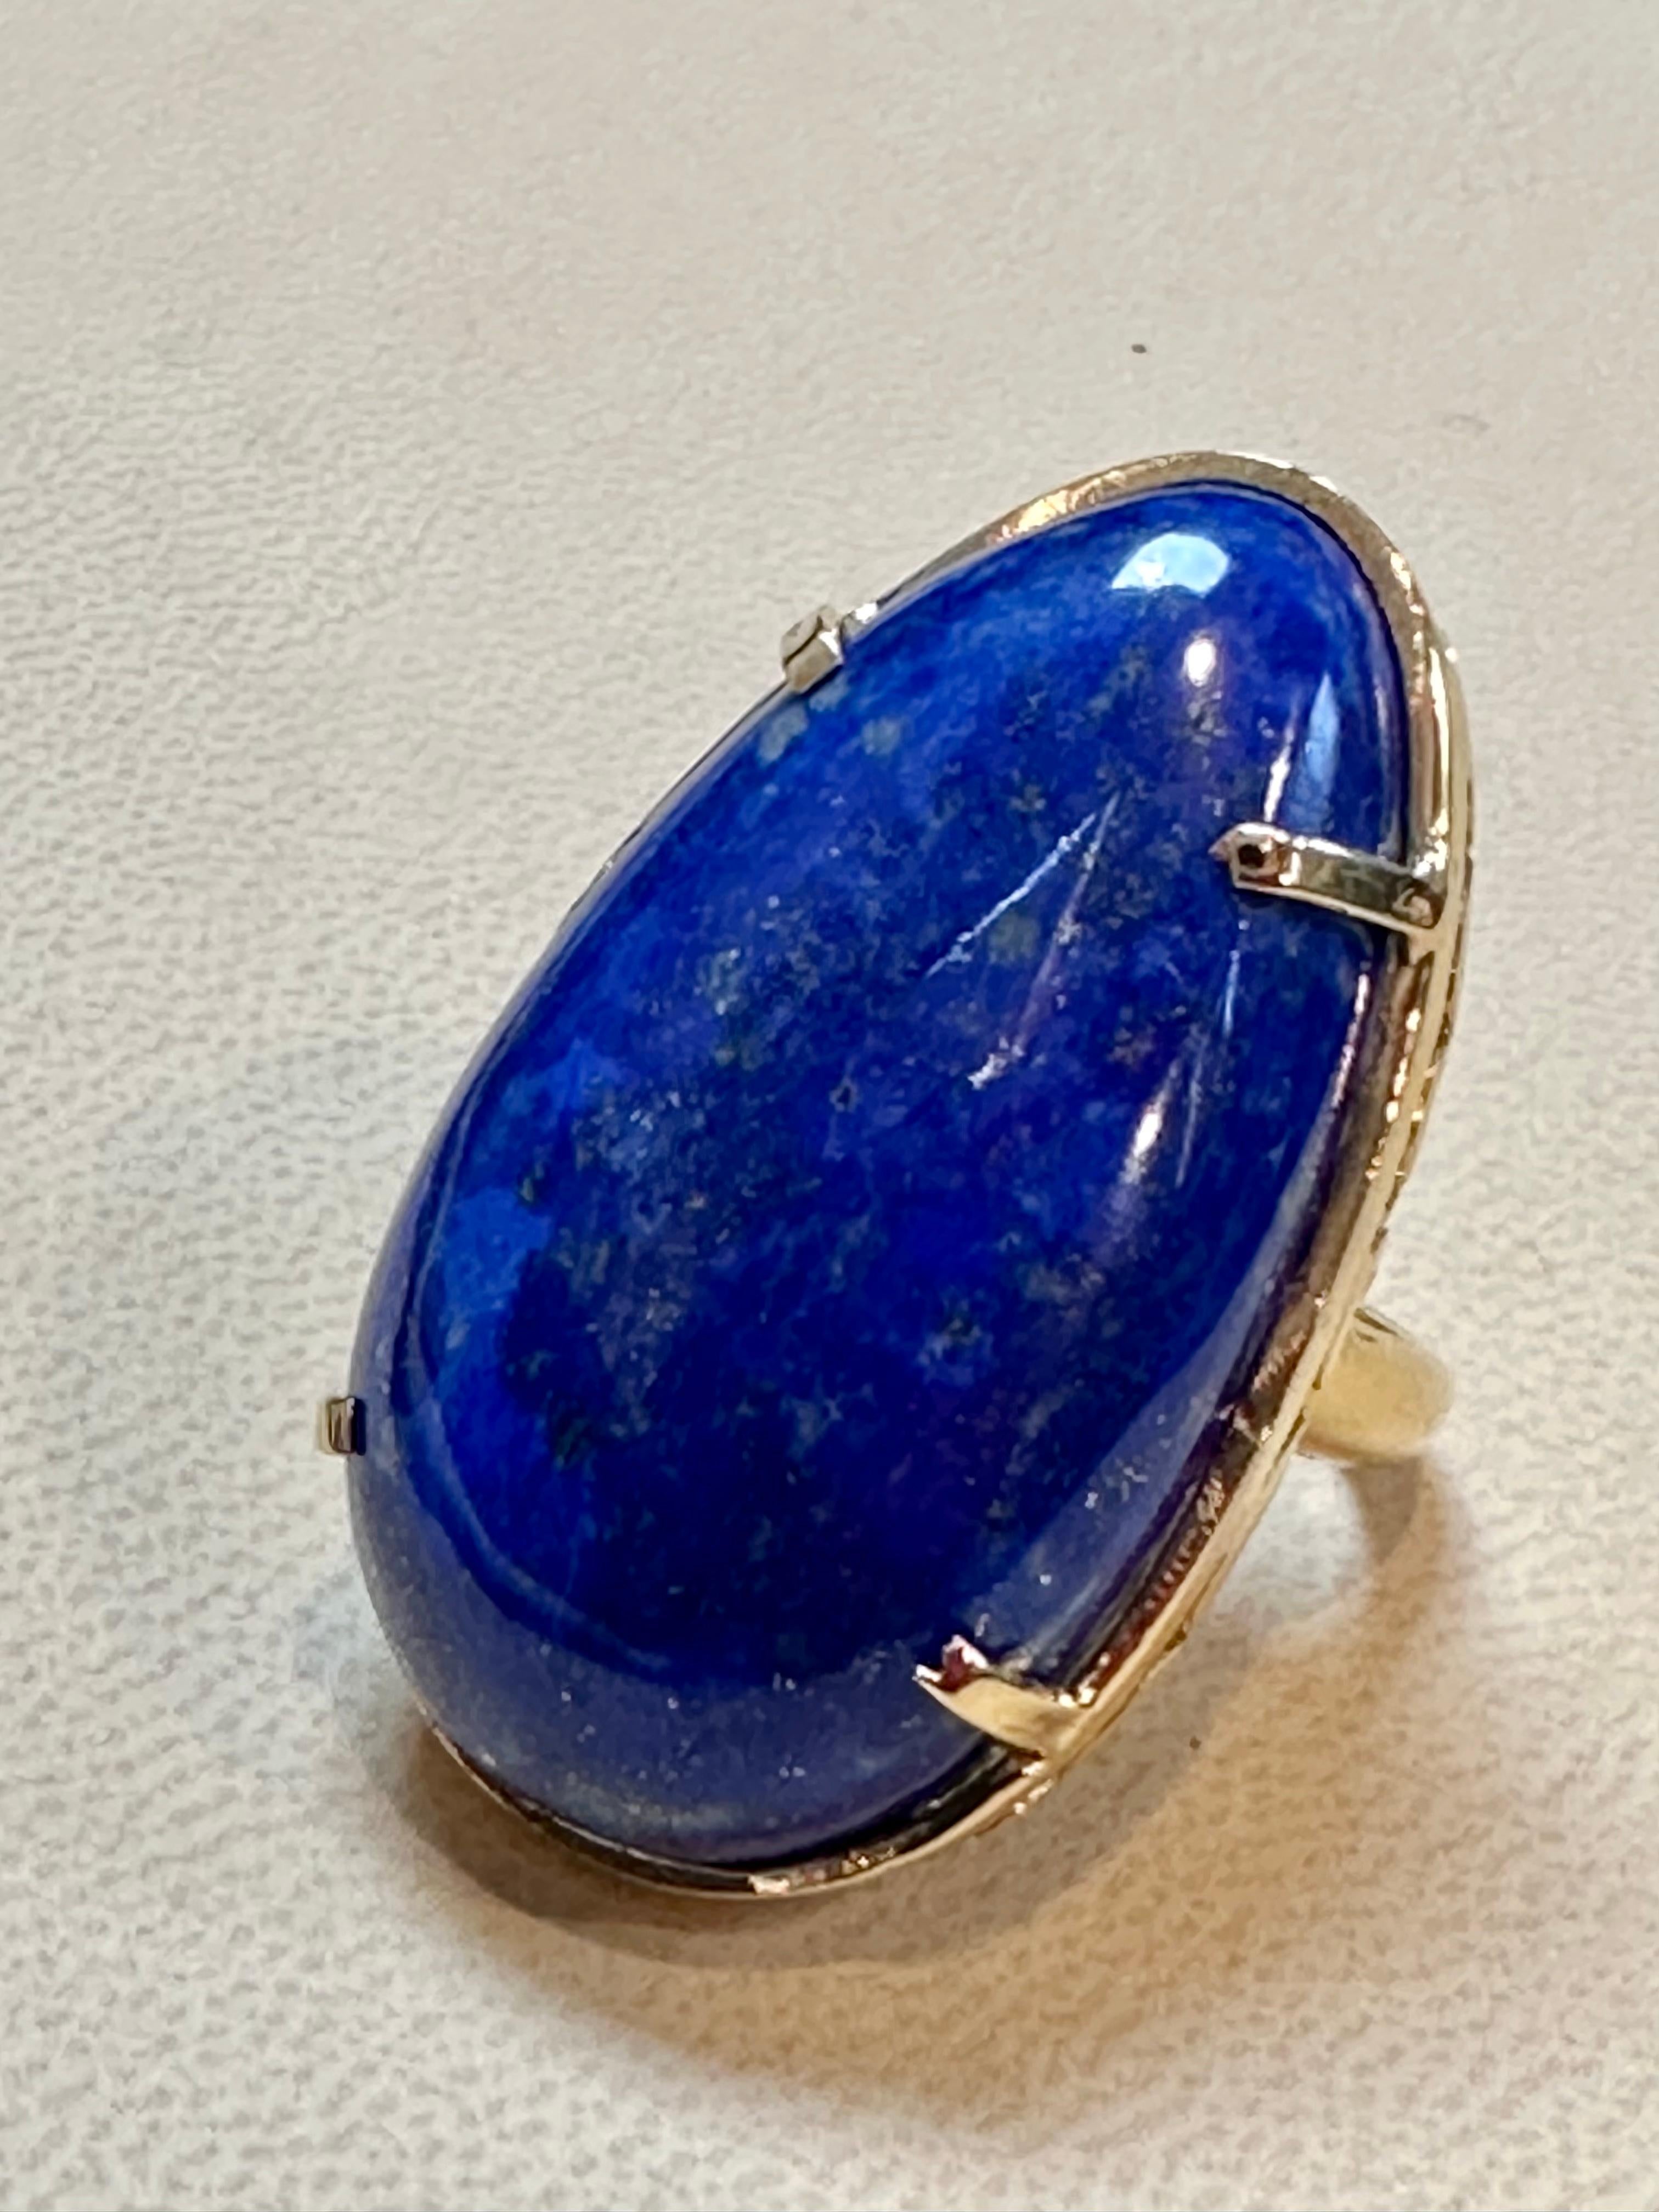 Huge 63 Ct Natural Cabochon Lapis Lazuli Ring in 14 Kt Yellow Gold, Estate For Sale 3